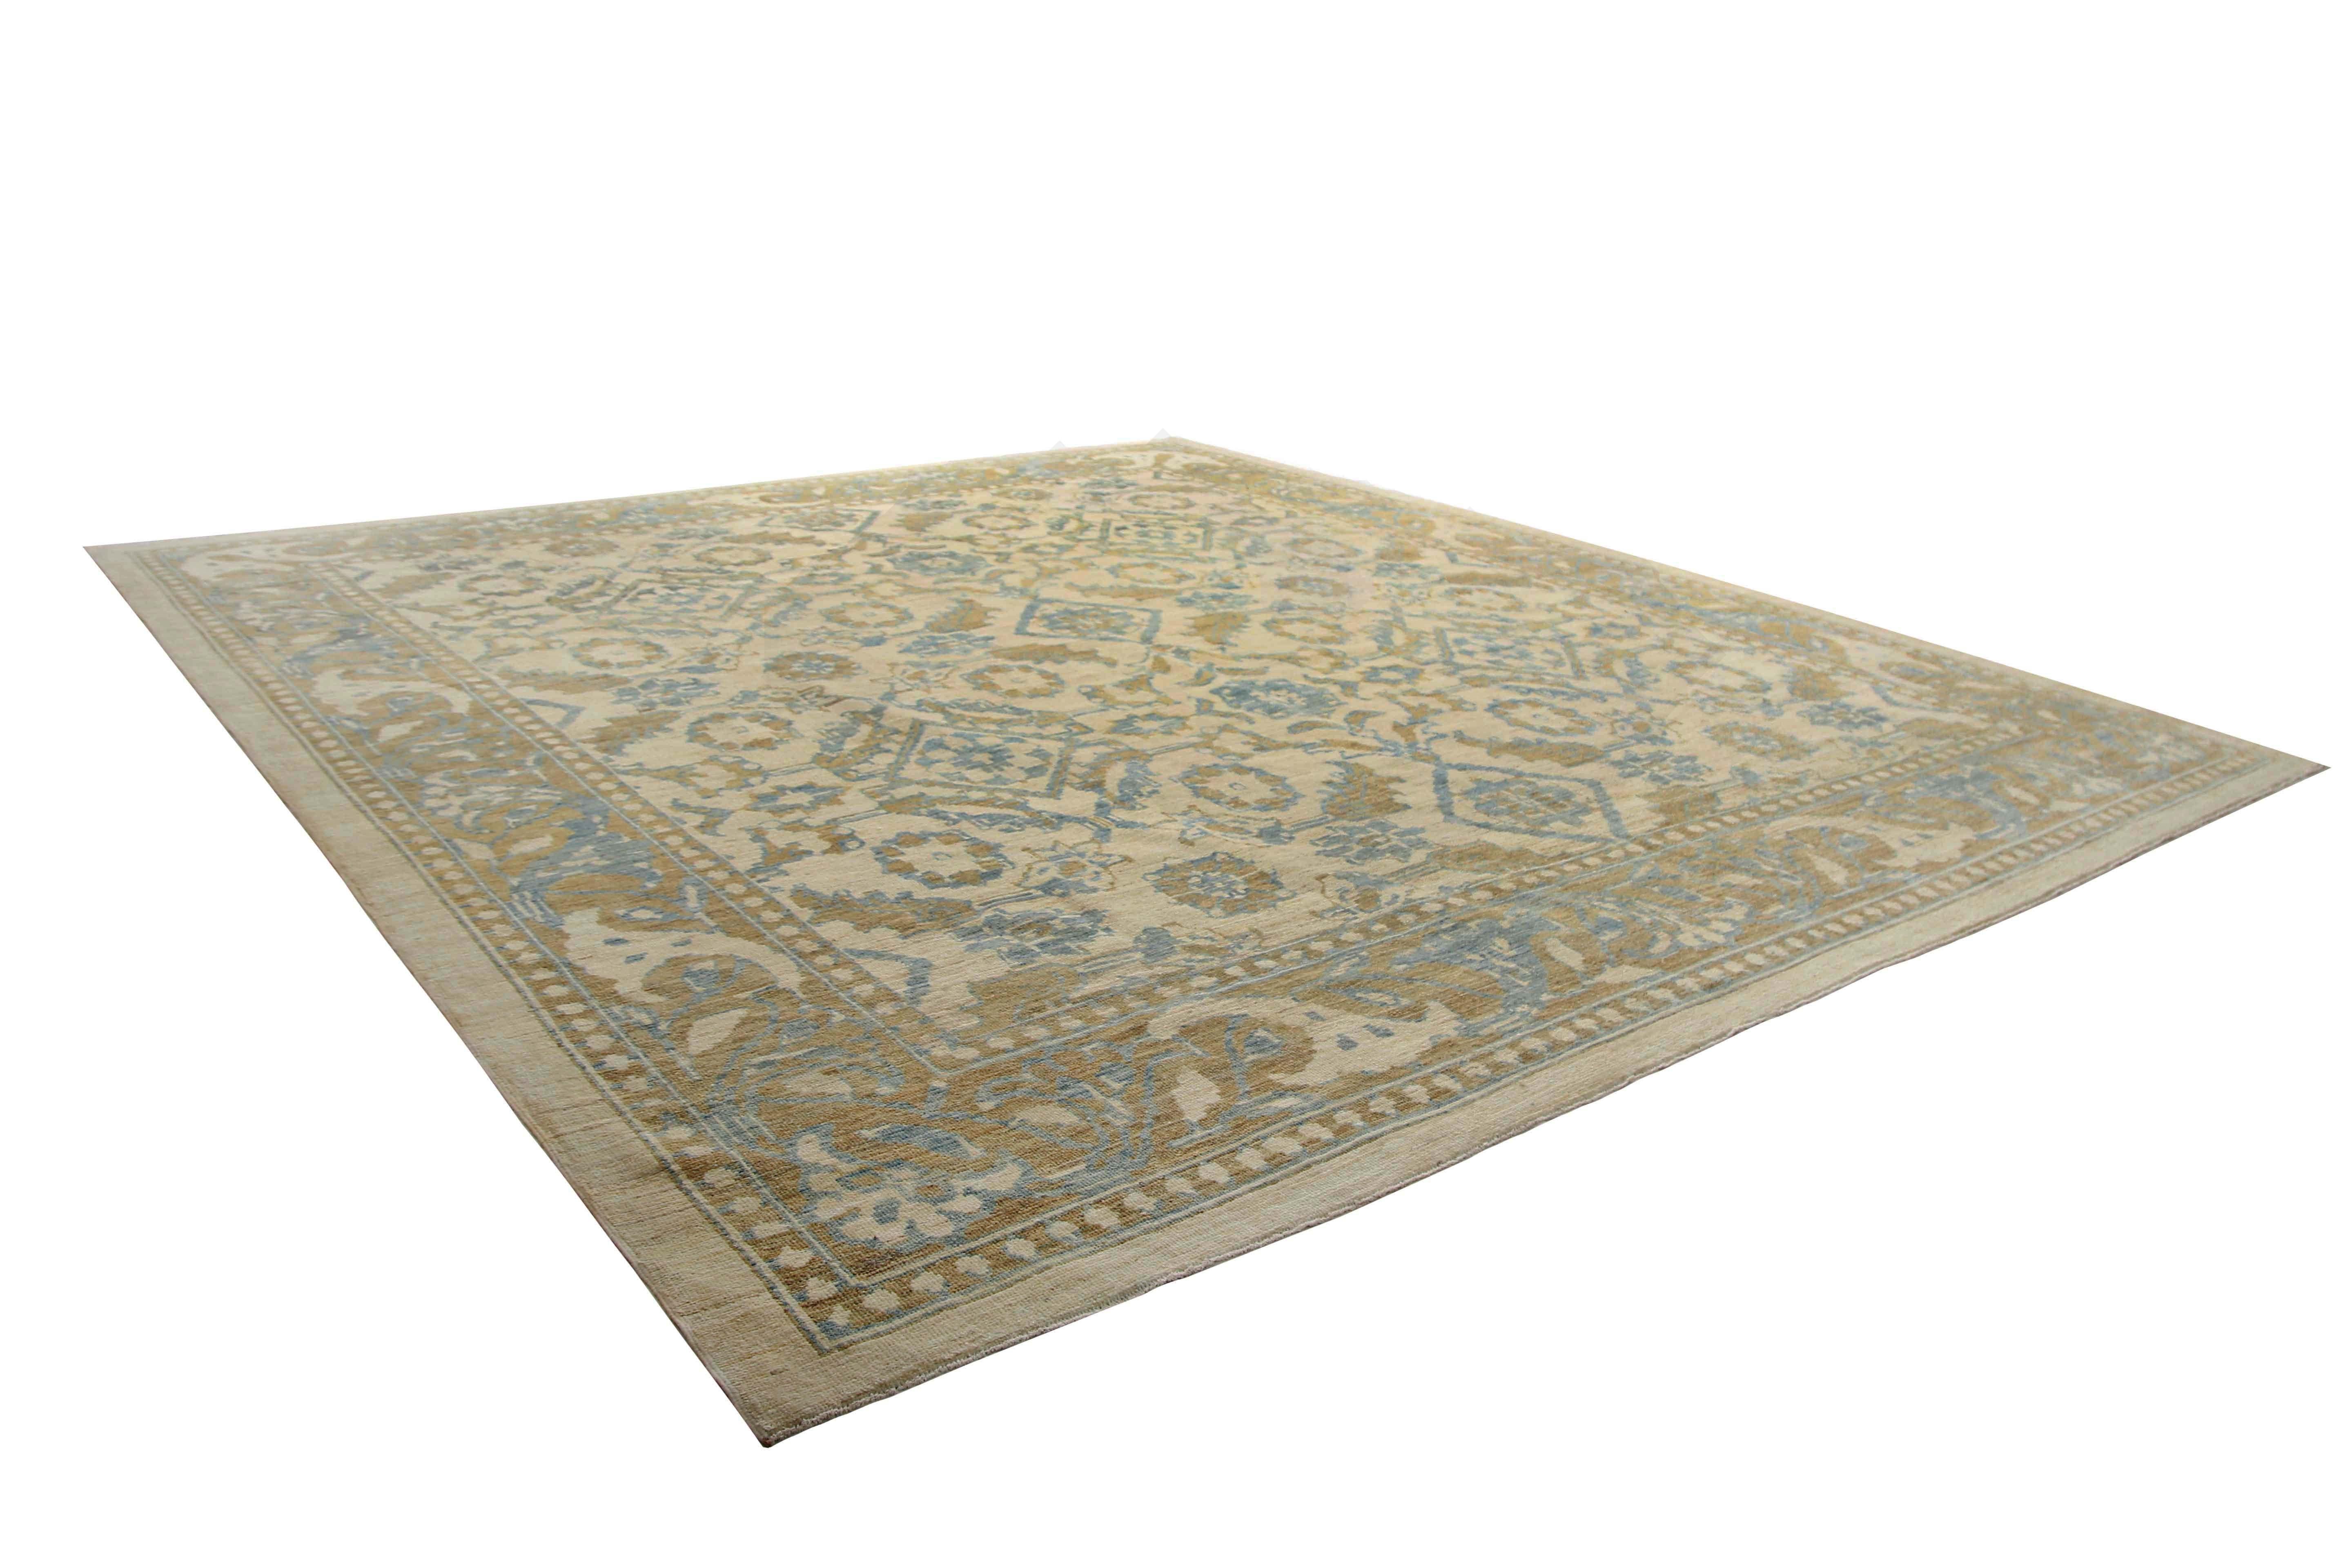 Luxurious Handmade Sultanabad Rug - Transitional Design, Blue, Green, and Yellow For Sale 4